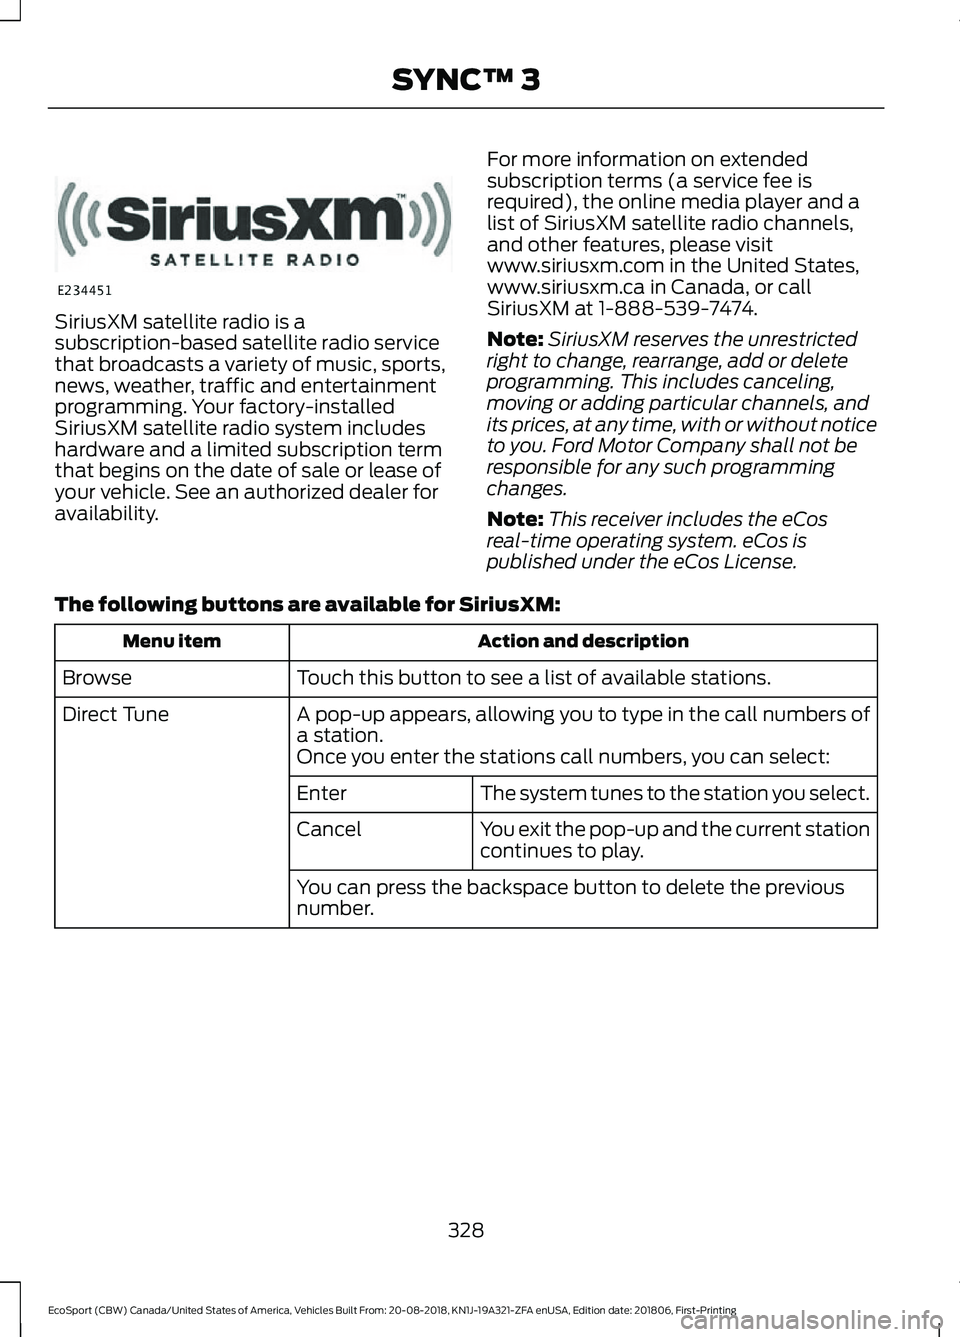 FORD ECOSPORT 2019  Owners Manual SiriusXM satellite radio is asubscription-based satellite radio servicethat broadcasts a variety of music, sports,news, weather, traffic and entertainmentprogramming. Your factory-installedSiriusXM sa